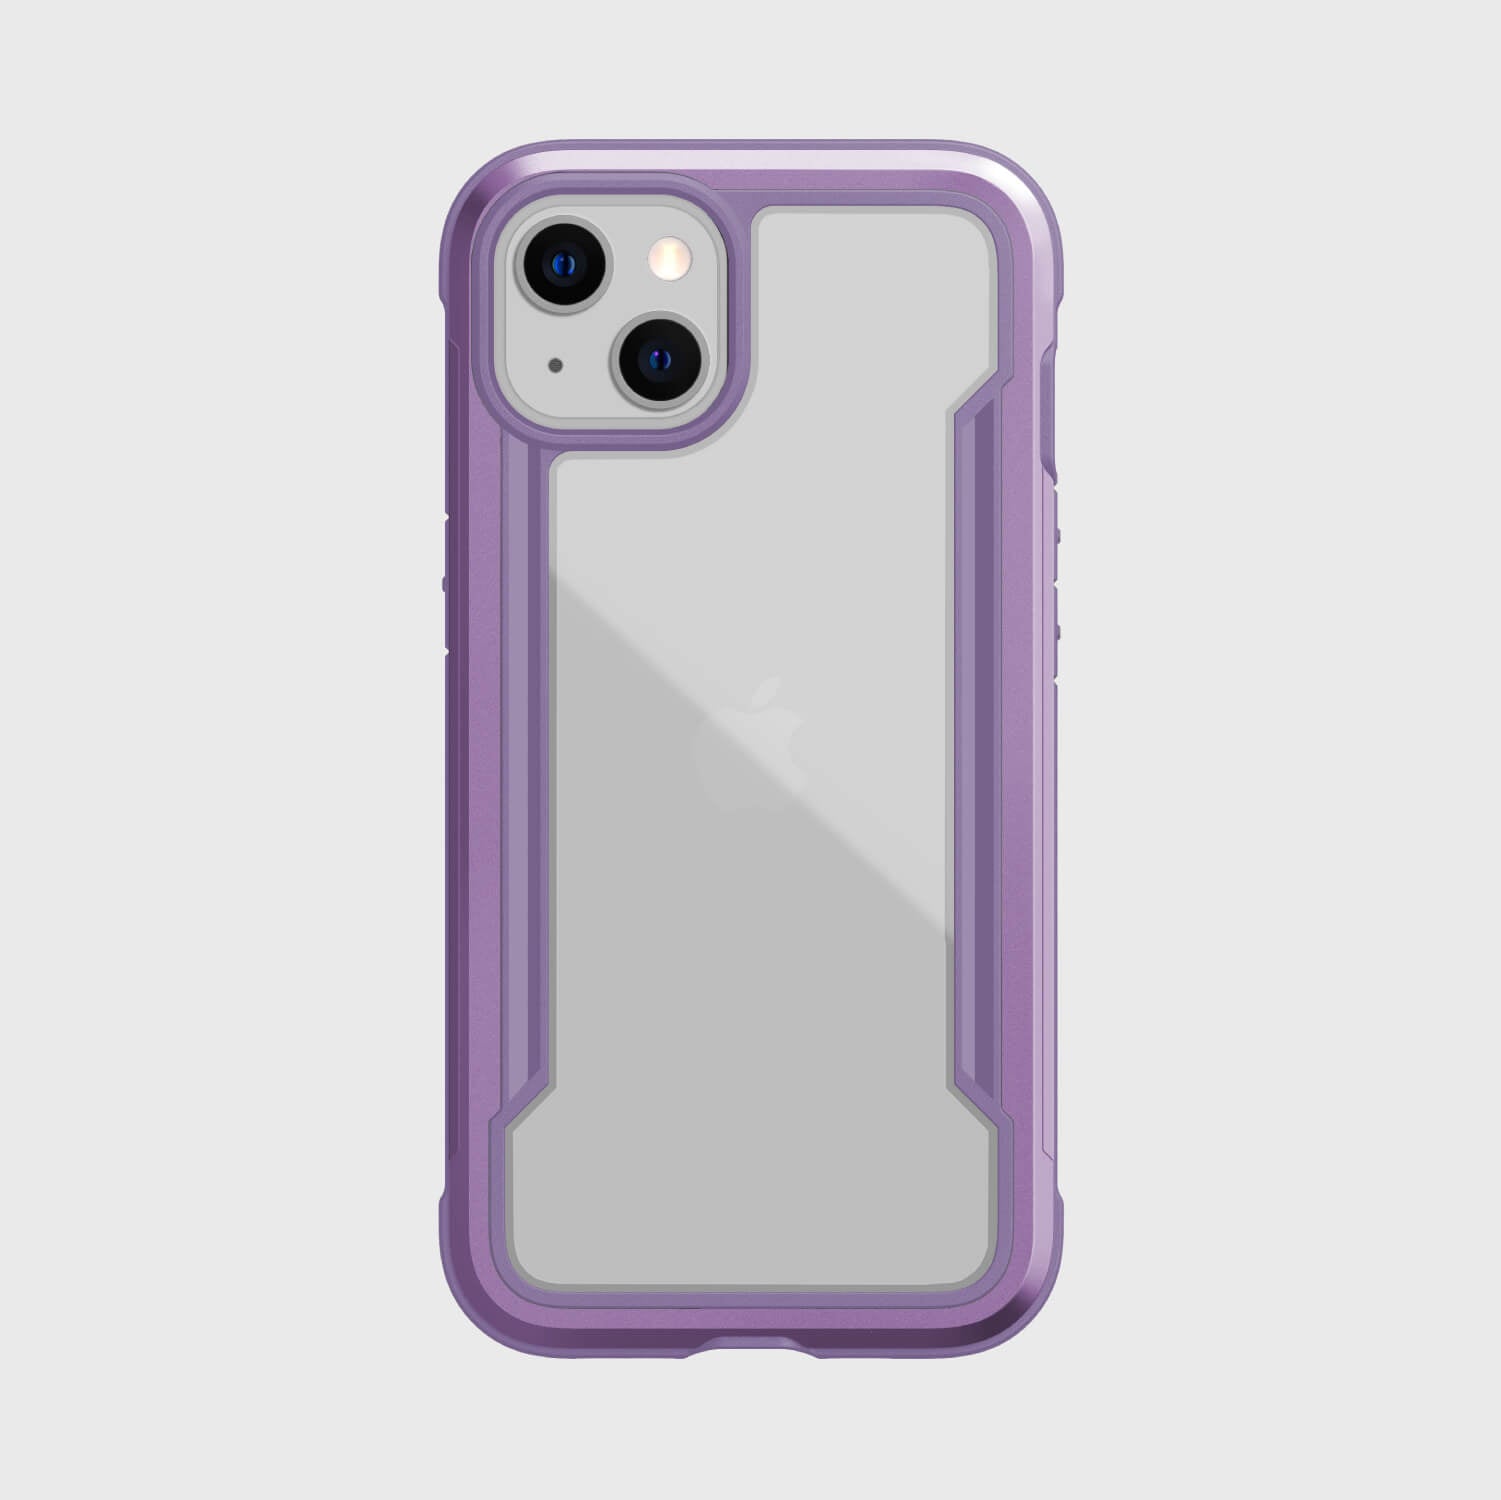 The back view of an iPhone 13 Mini Case - SHIELD PRO in purple by Raptic.